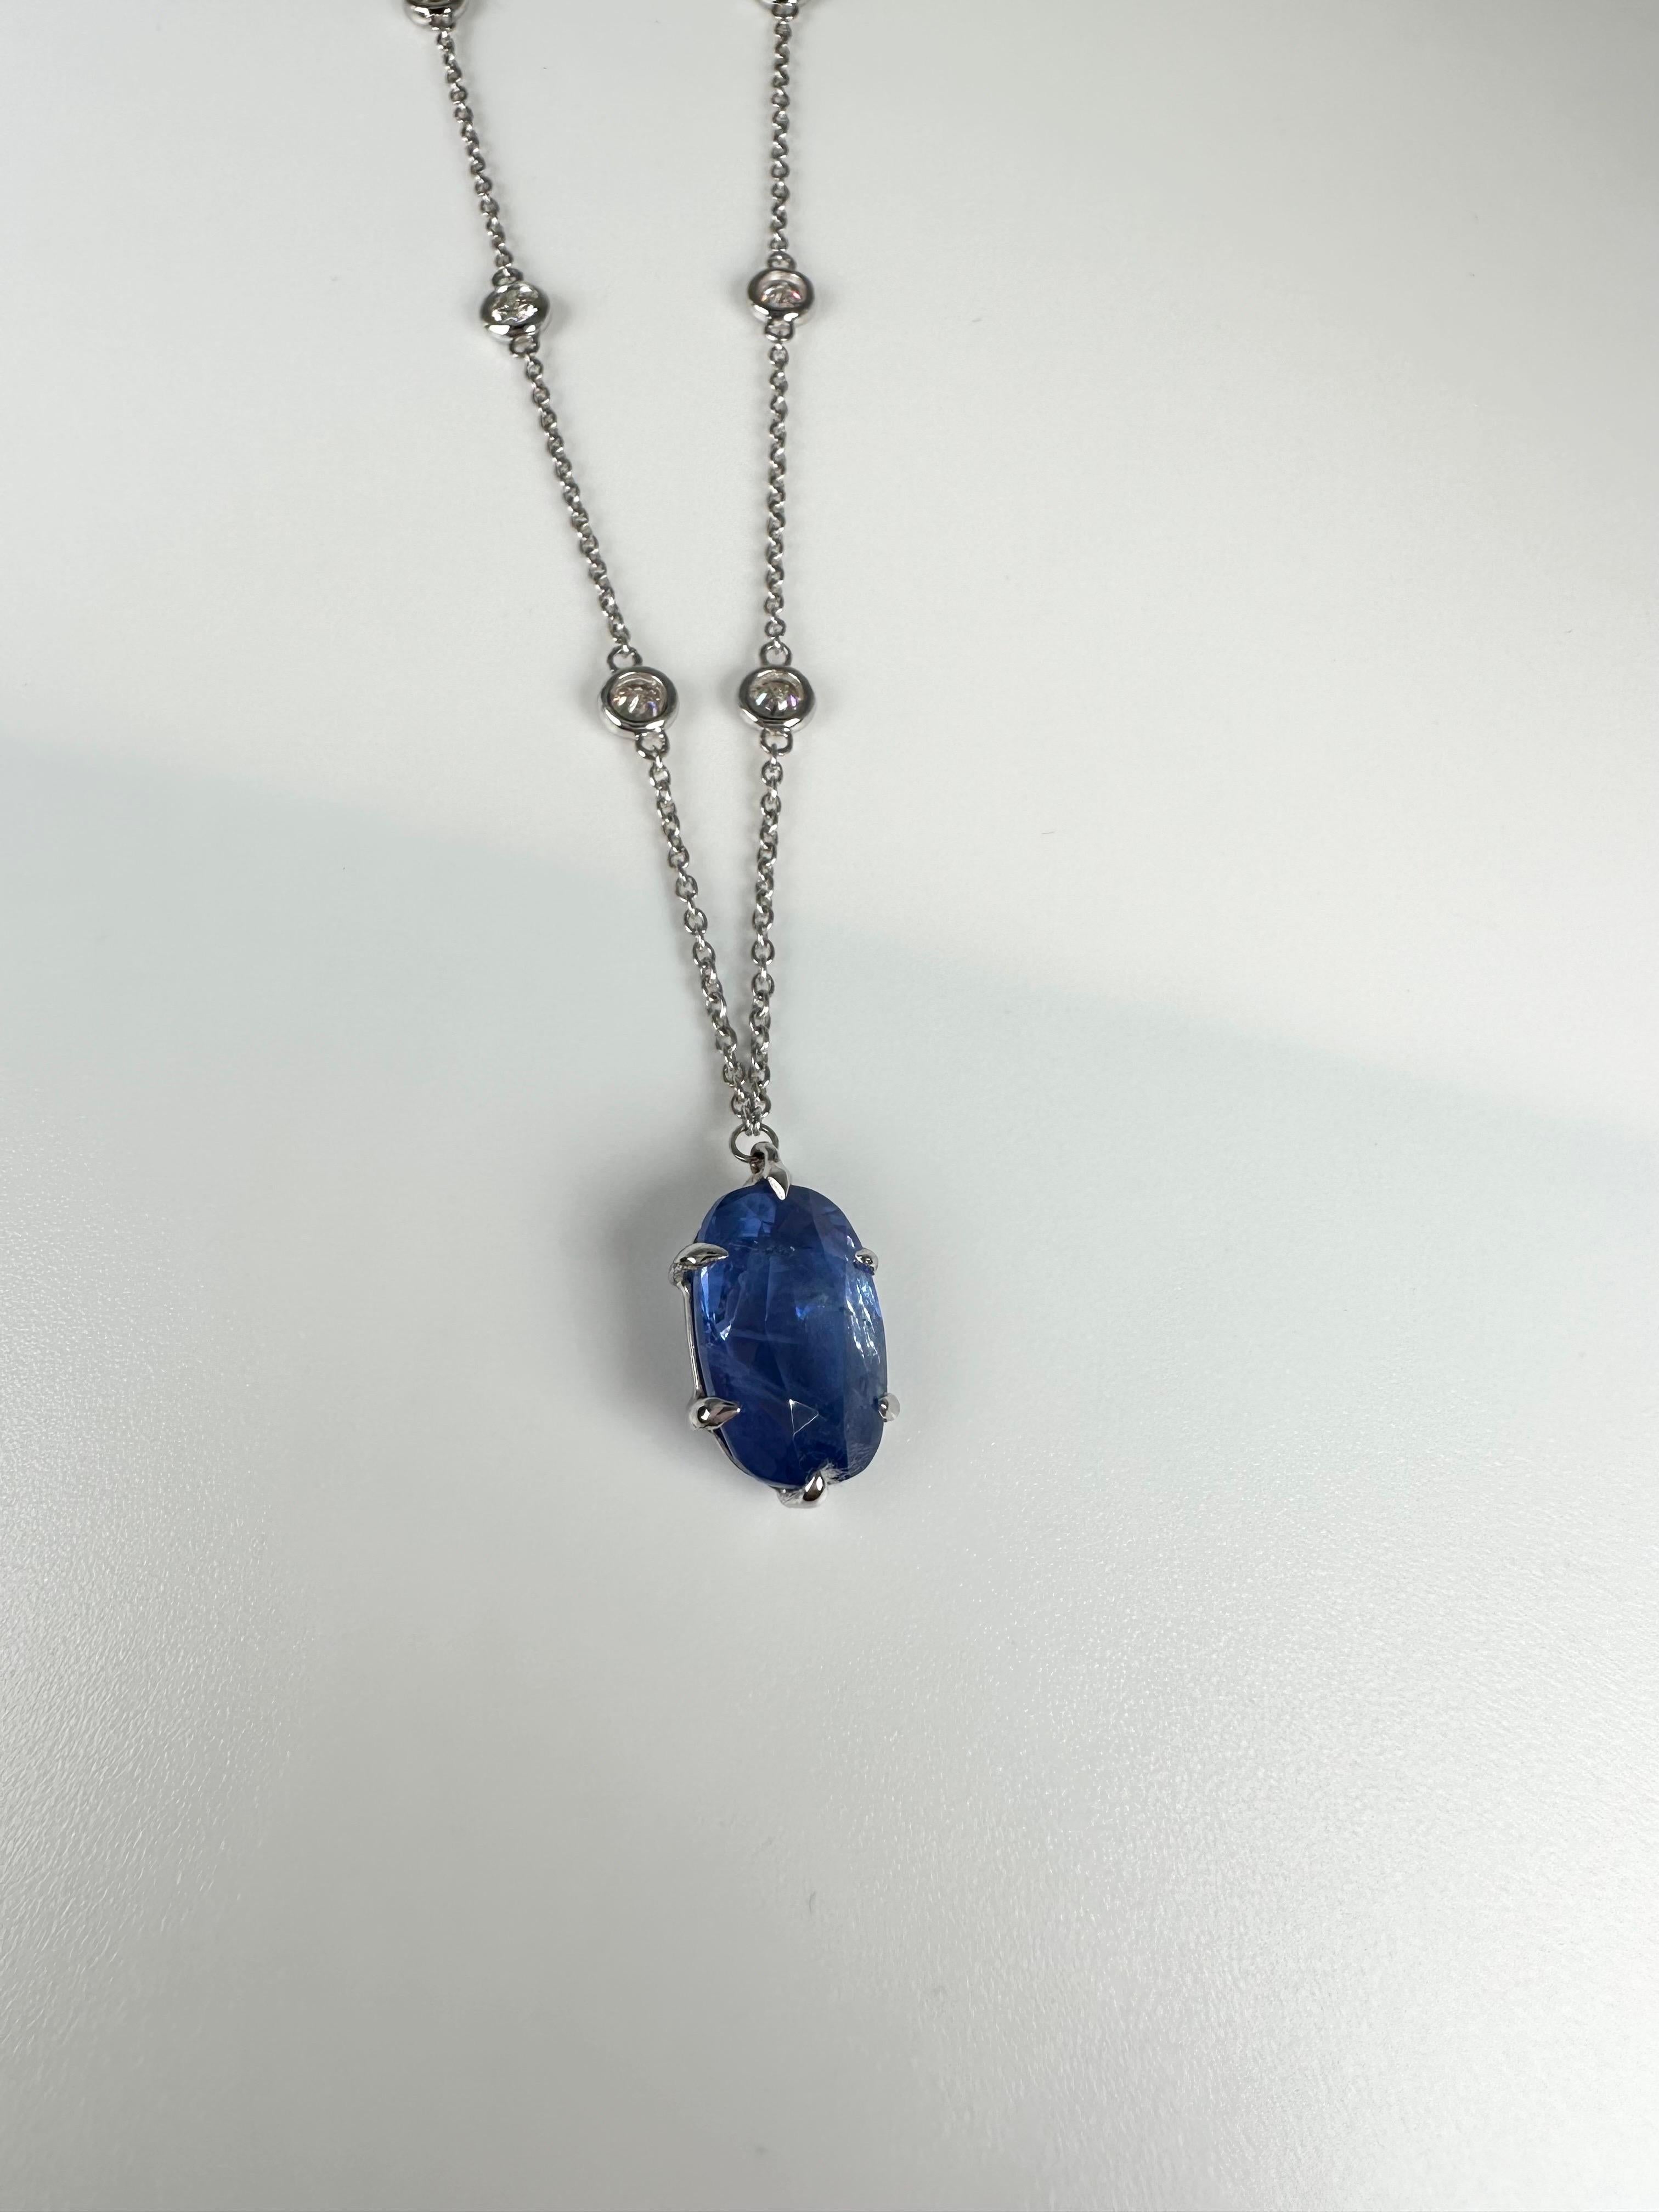 Rare Large Sapphire Diamond Pendant Necklace by the Yard 14kt 5.14ct Sapphire In New Condition For Sale In Jupiter, FL